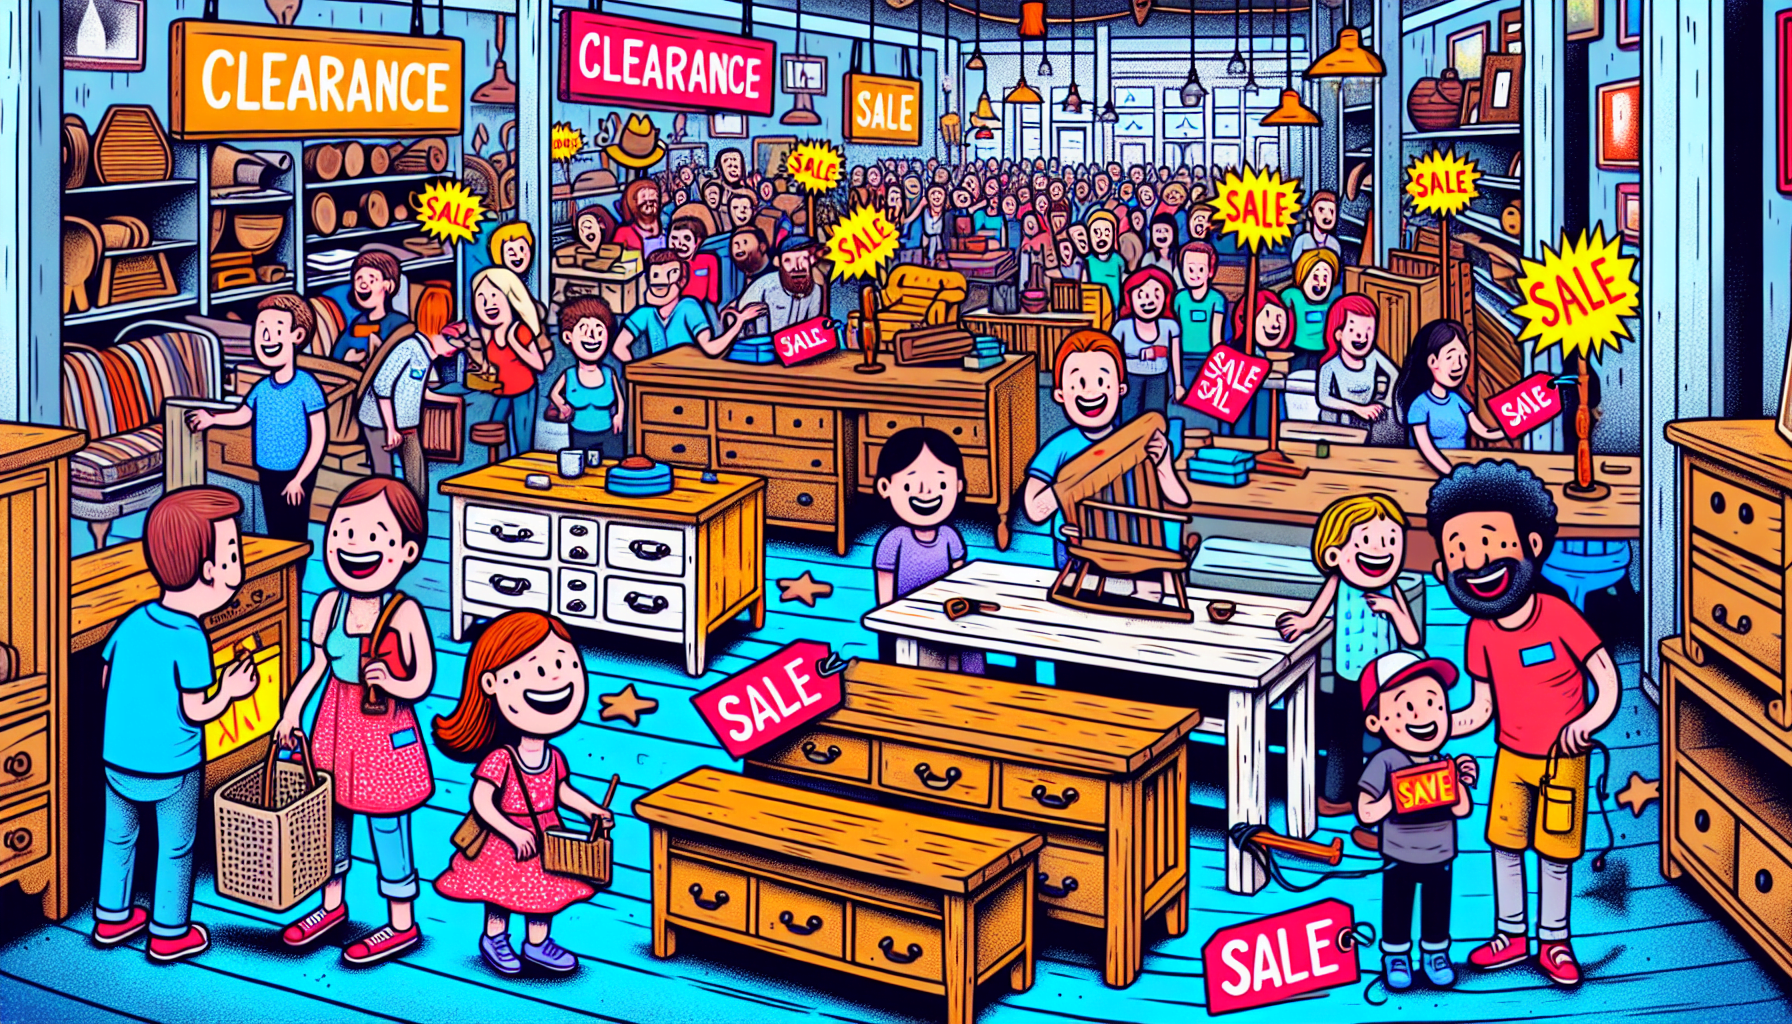 Illustration of clearance sale at a furniture store